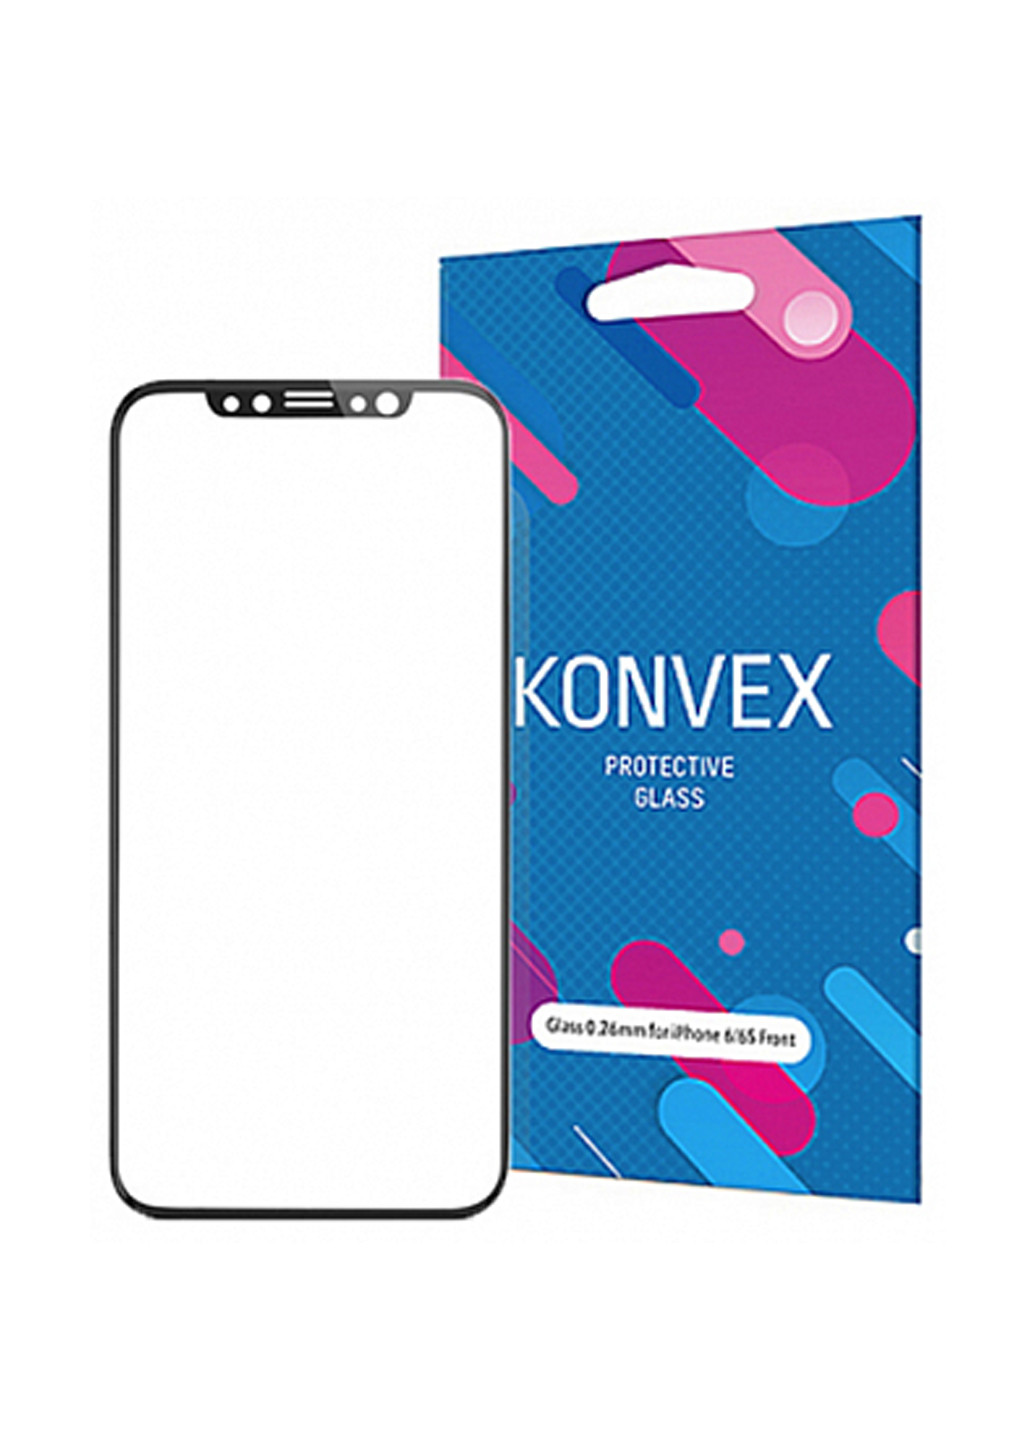 Скло Tempered Glass Full 3D for iPhone 11 / XR Front Black Konvex tempered glass full 3d for iphone 11/xr front black (162931908)